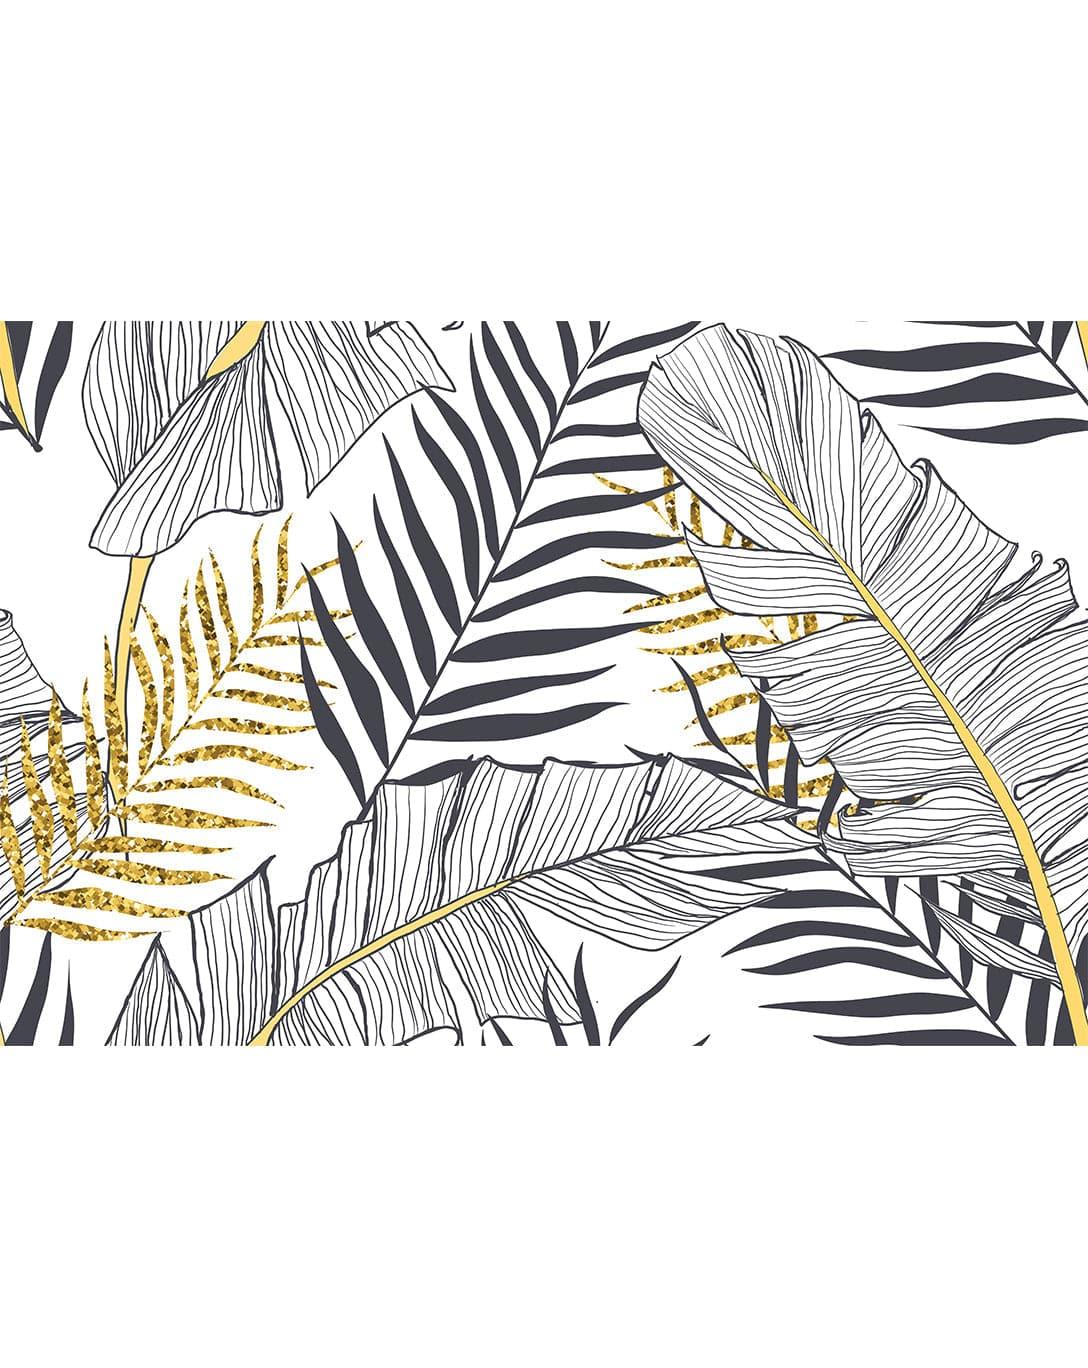 Oversized Black Gold Exotic Palm Leaves Wall Mural Oversized Black Gold Exotic Palm Leaves Wall Mural 